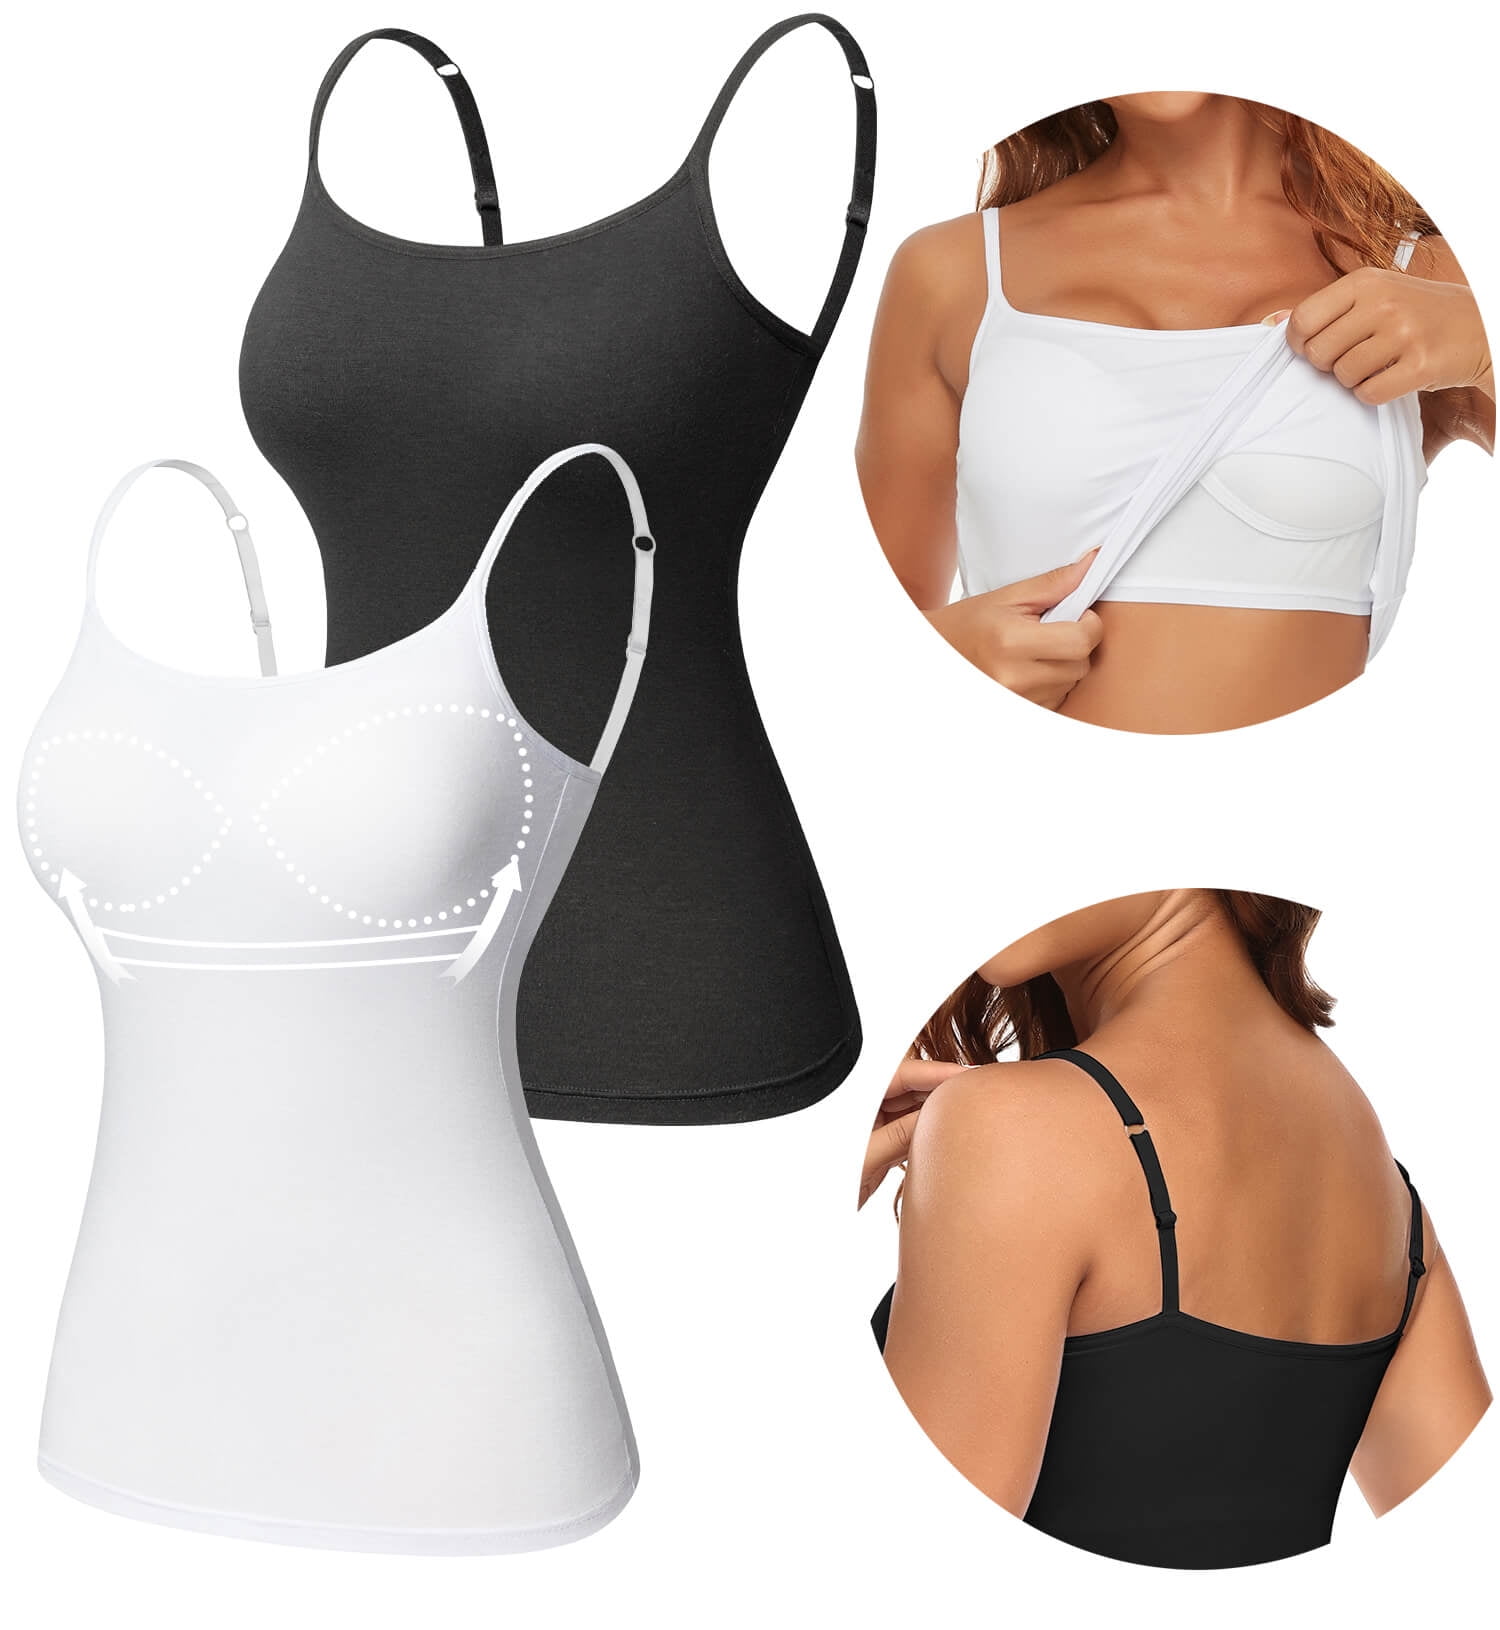 Buy Women's CAMI Camisole With Built in Shelf BRA Adjustable Spaghetti  Strap Layer Tank Top Online in India 